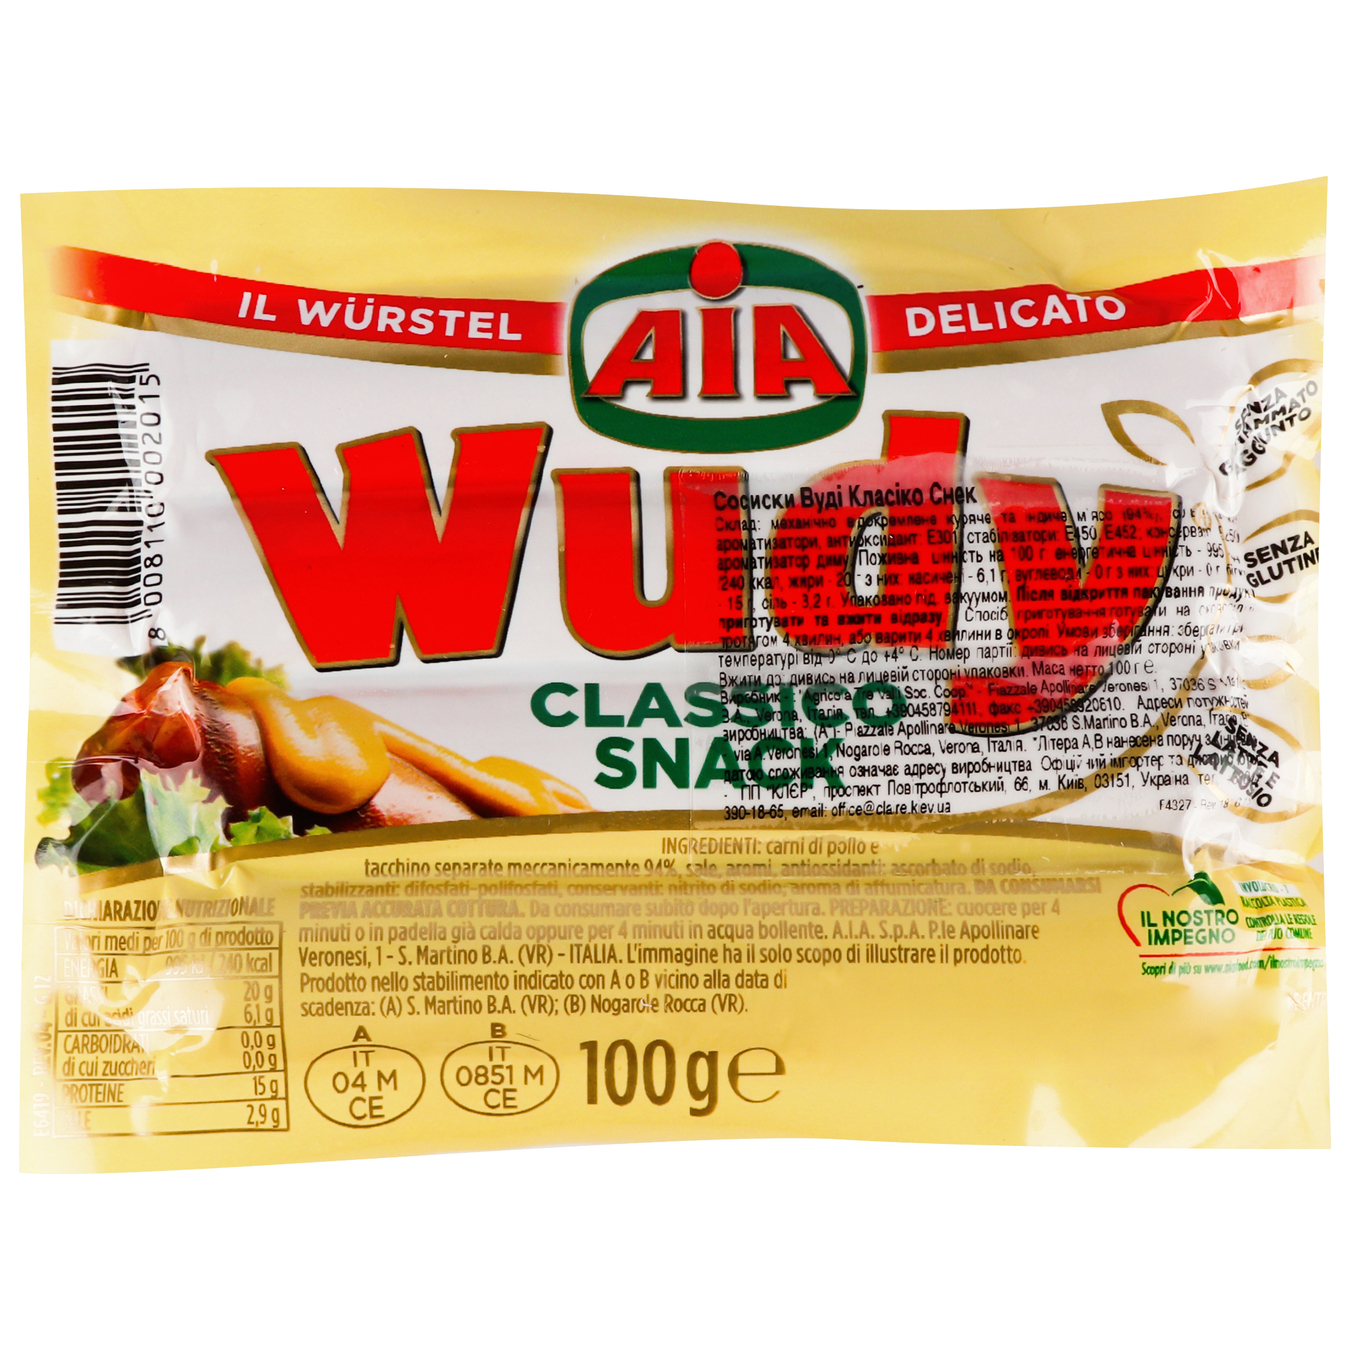 AIA Wudy Classico Snack Sausages 100g